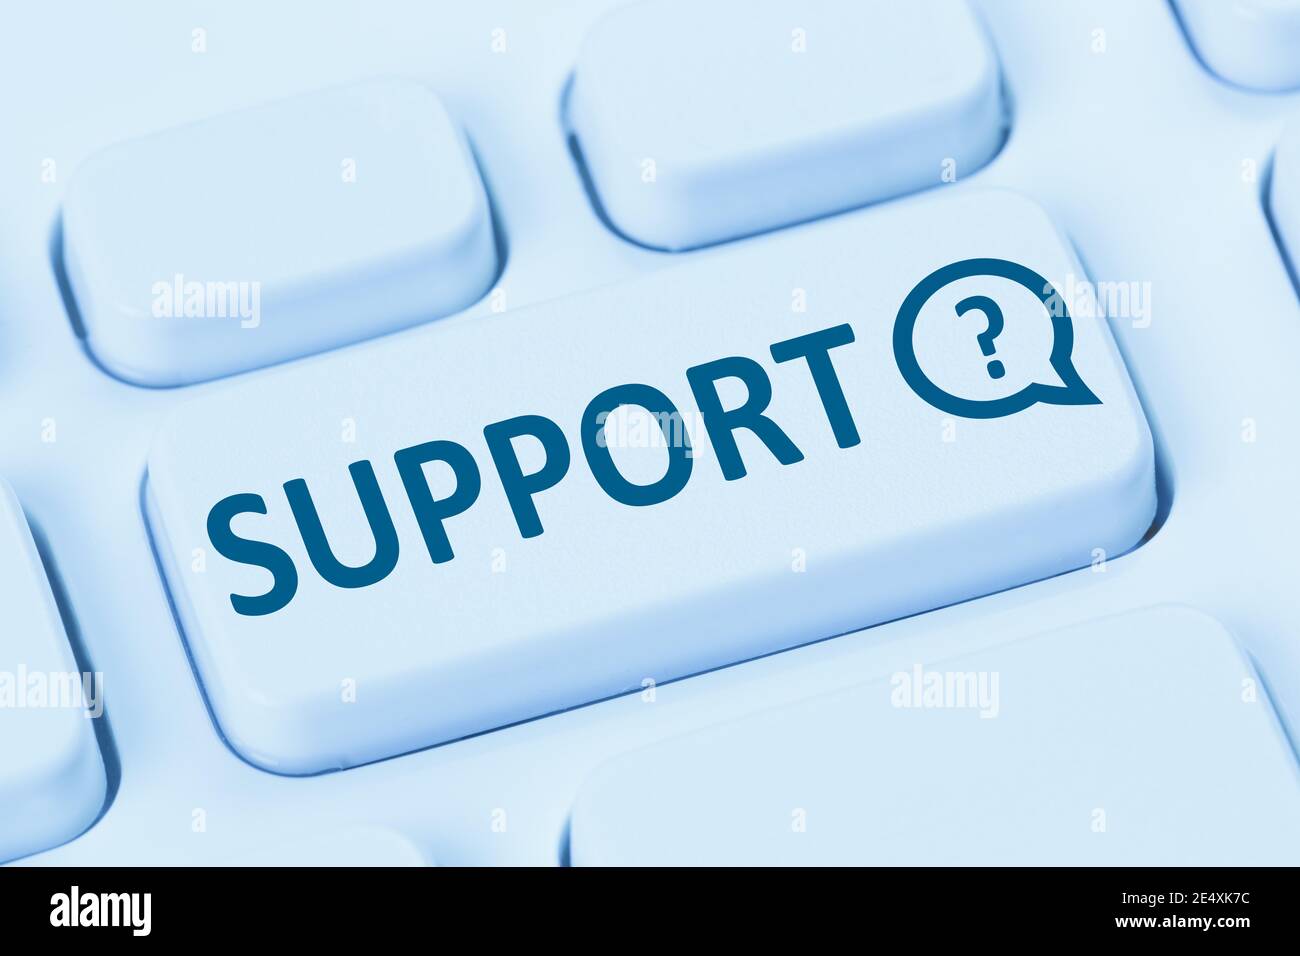 Support online help contact customer service communication telephone internet blue symbol computer keyboard Stock Photo